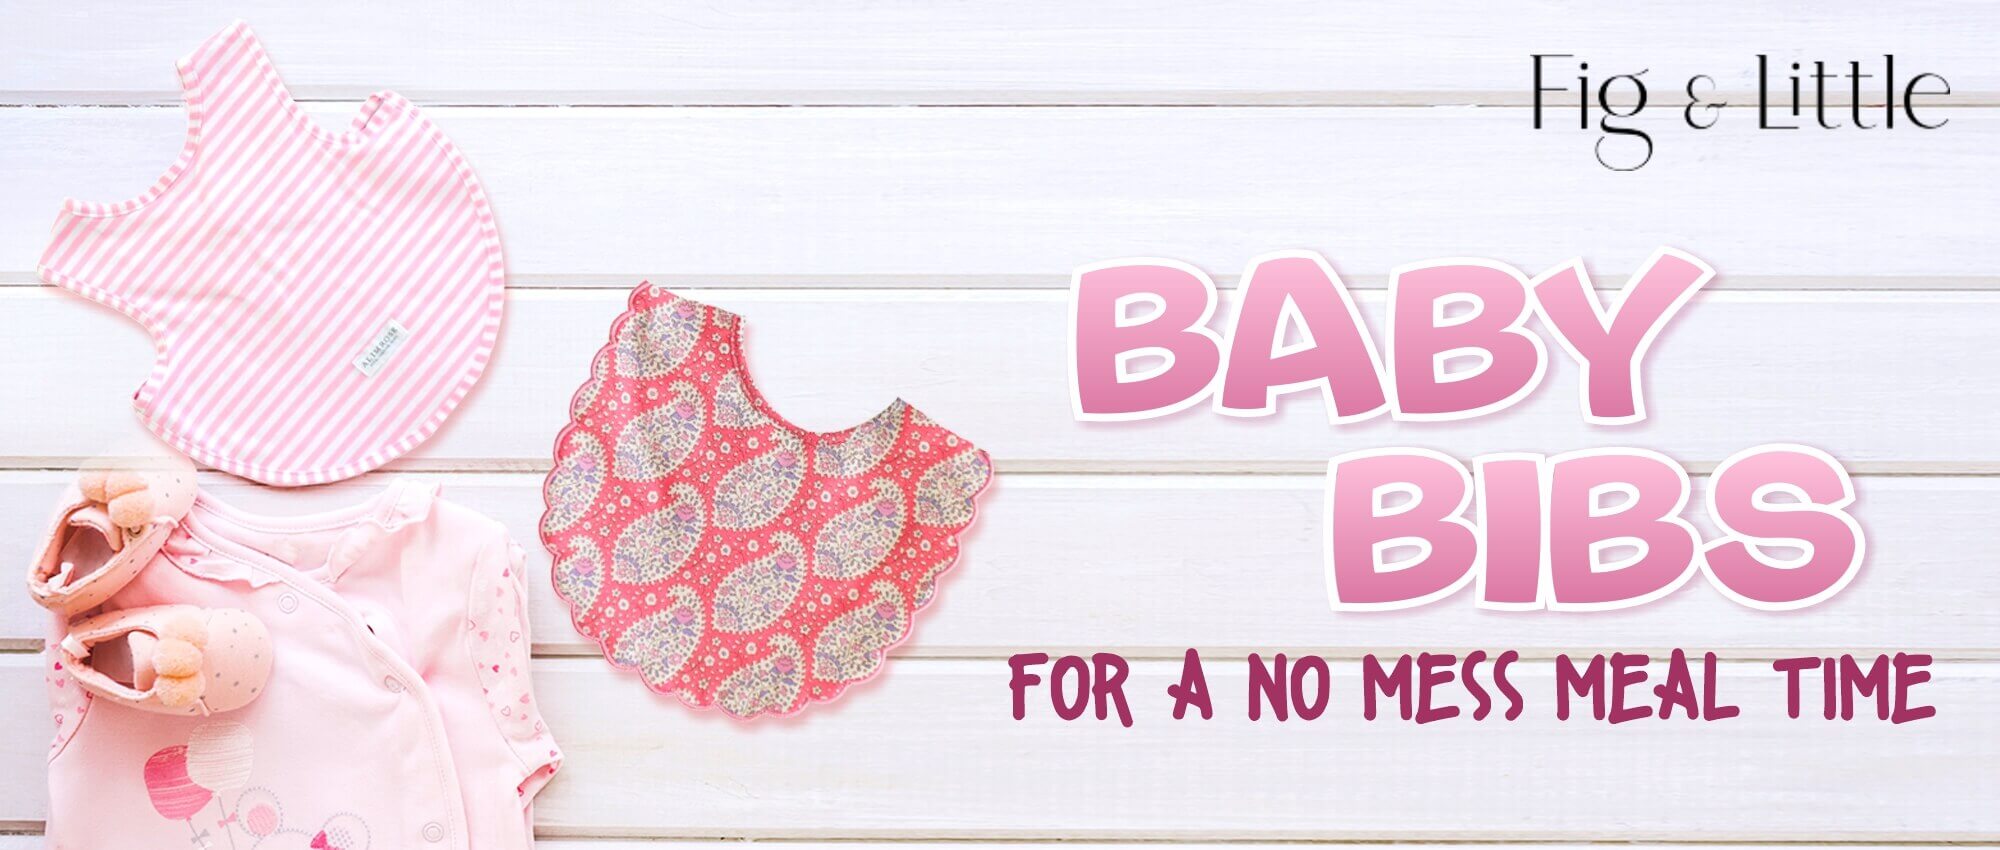 BABY BIBS FOR A NO MESS MEAL TIME